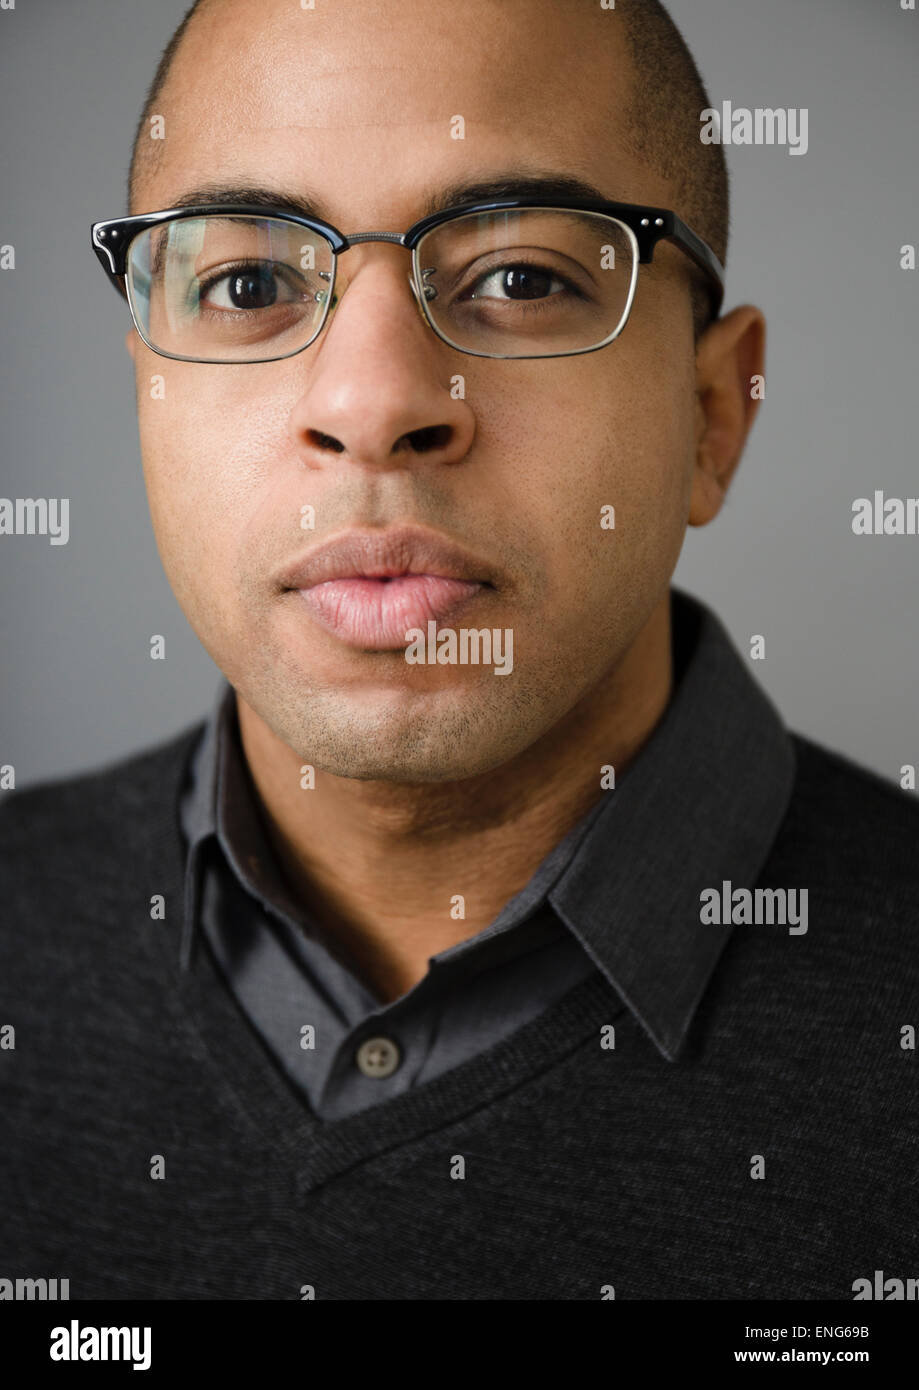 Close up of mixed race man wearing eyeglasses Banque D'Images